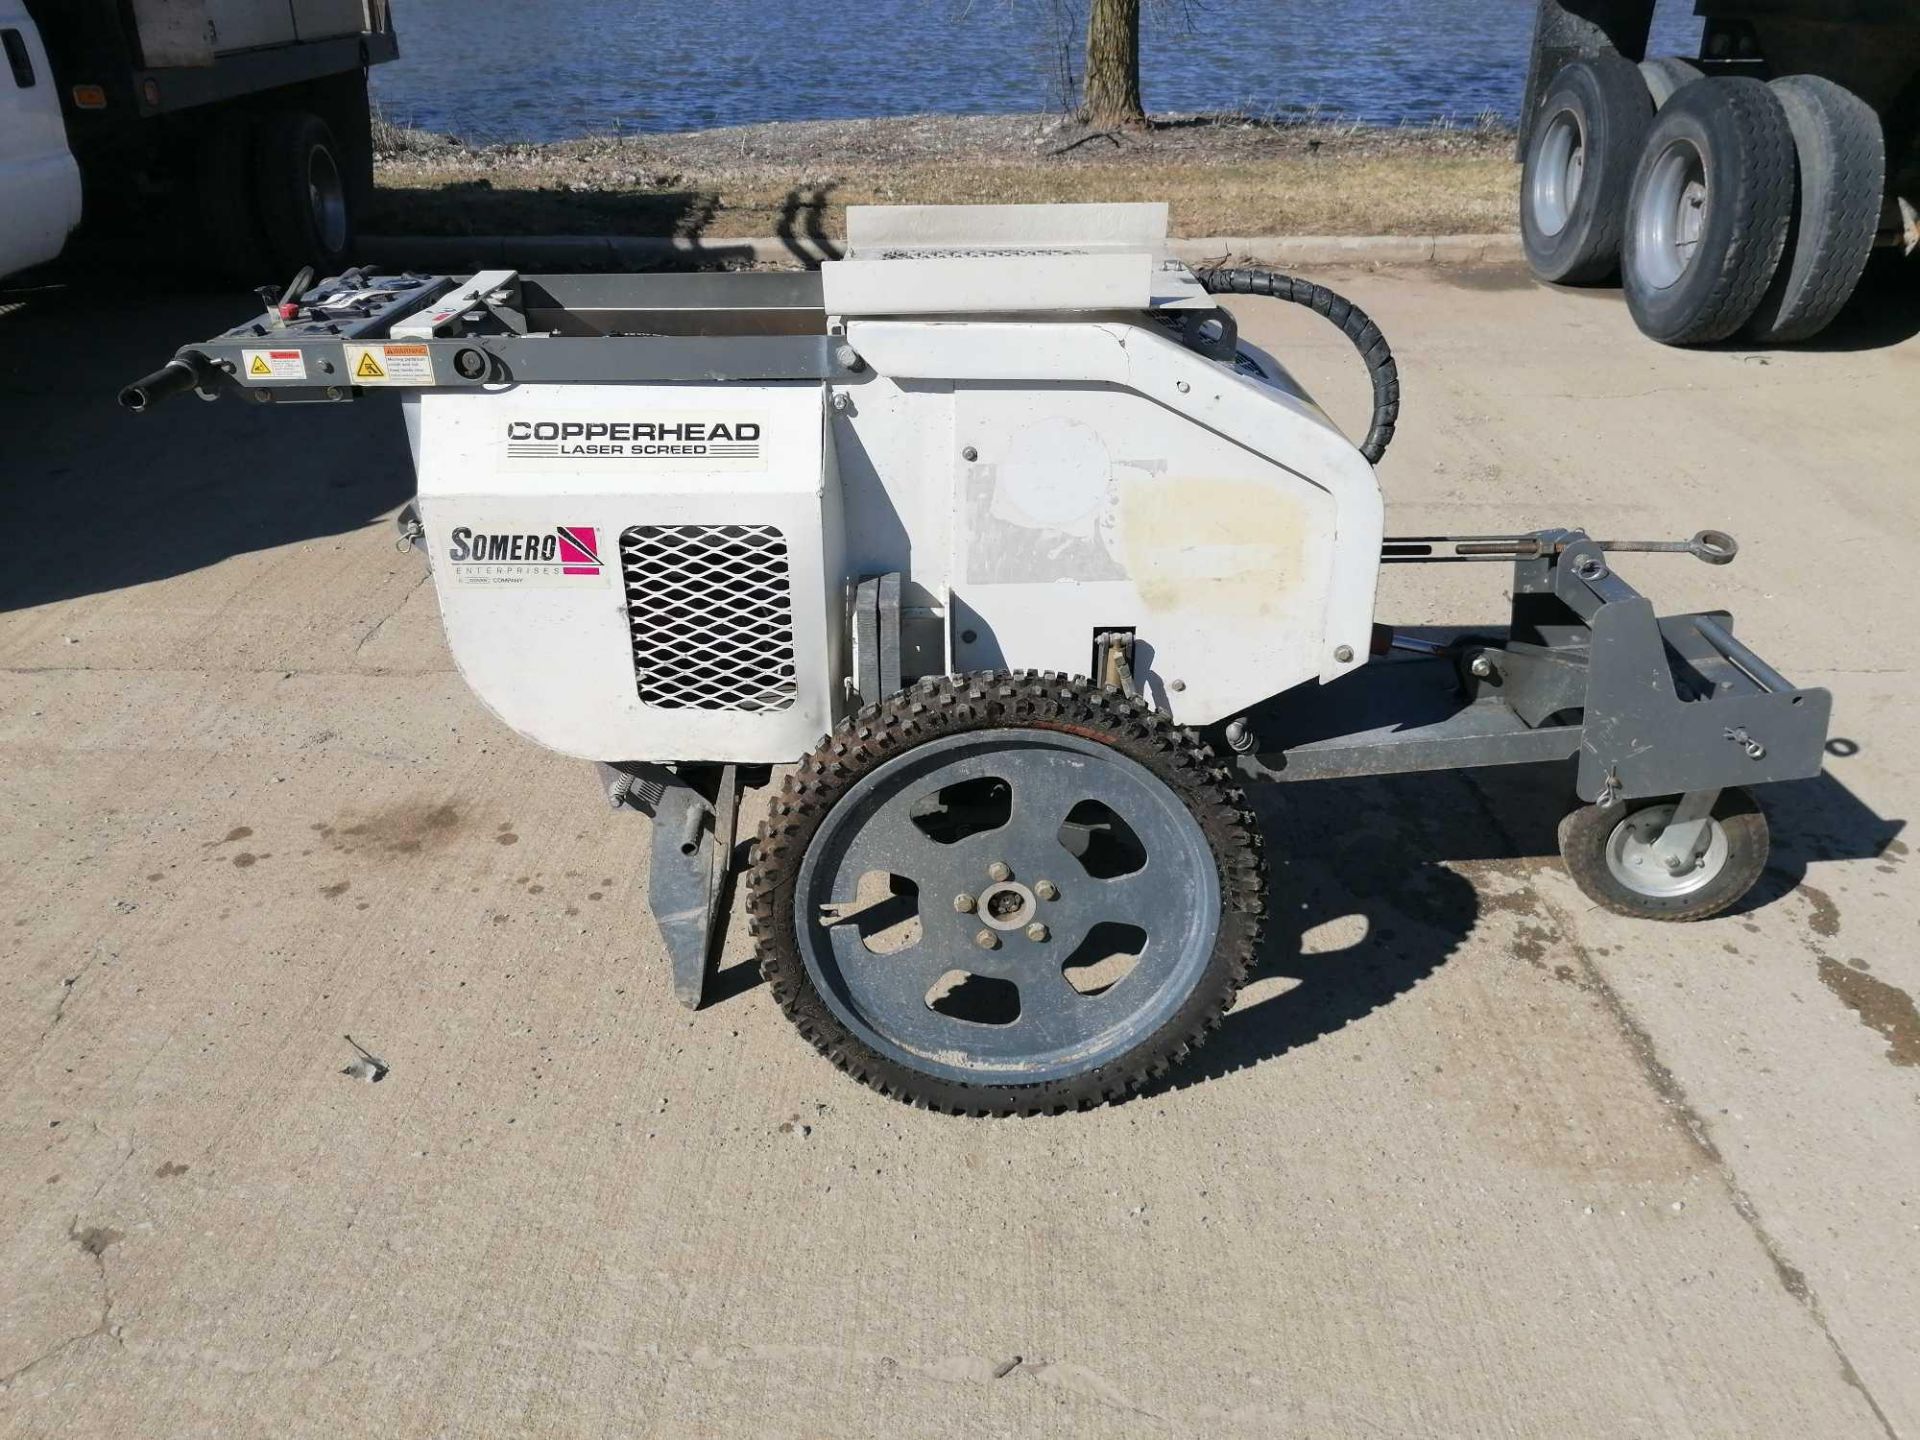 Somero Copperhead Laser Screed, (1) Operation Box Connections, (1) Trimble Model GCR-4, Serial #